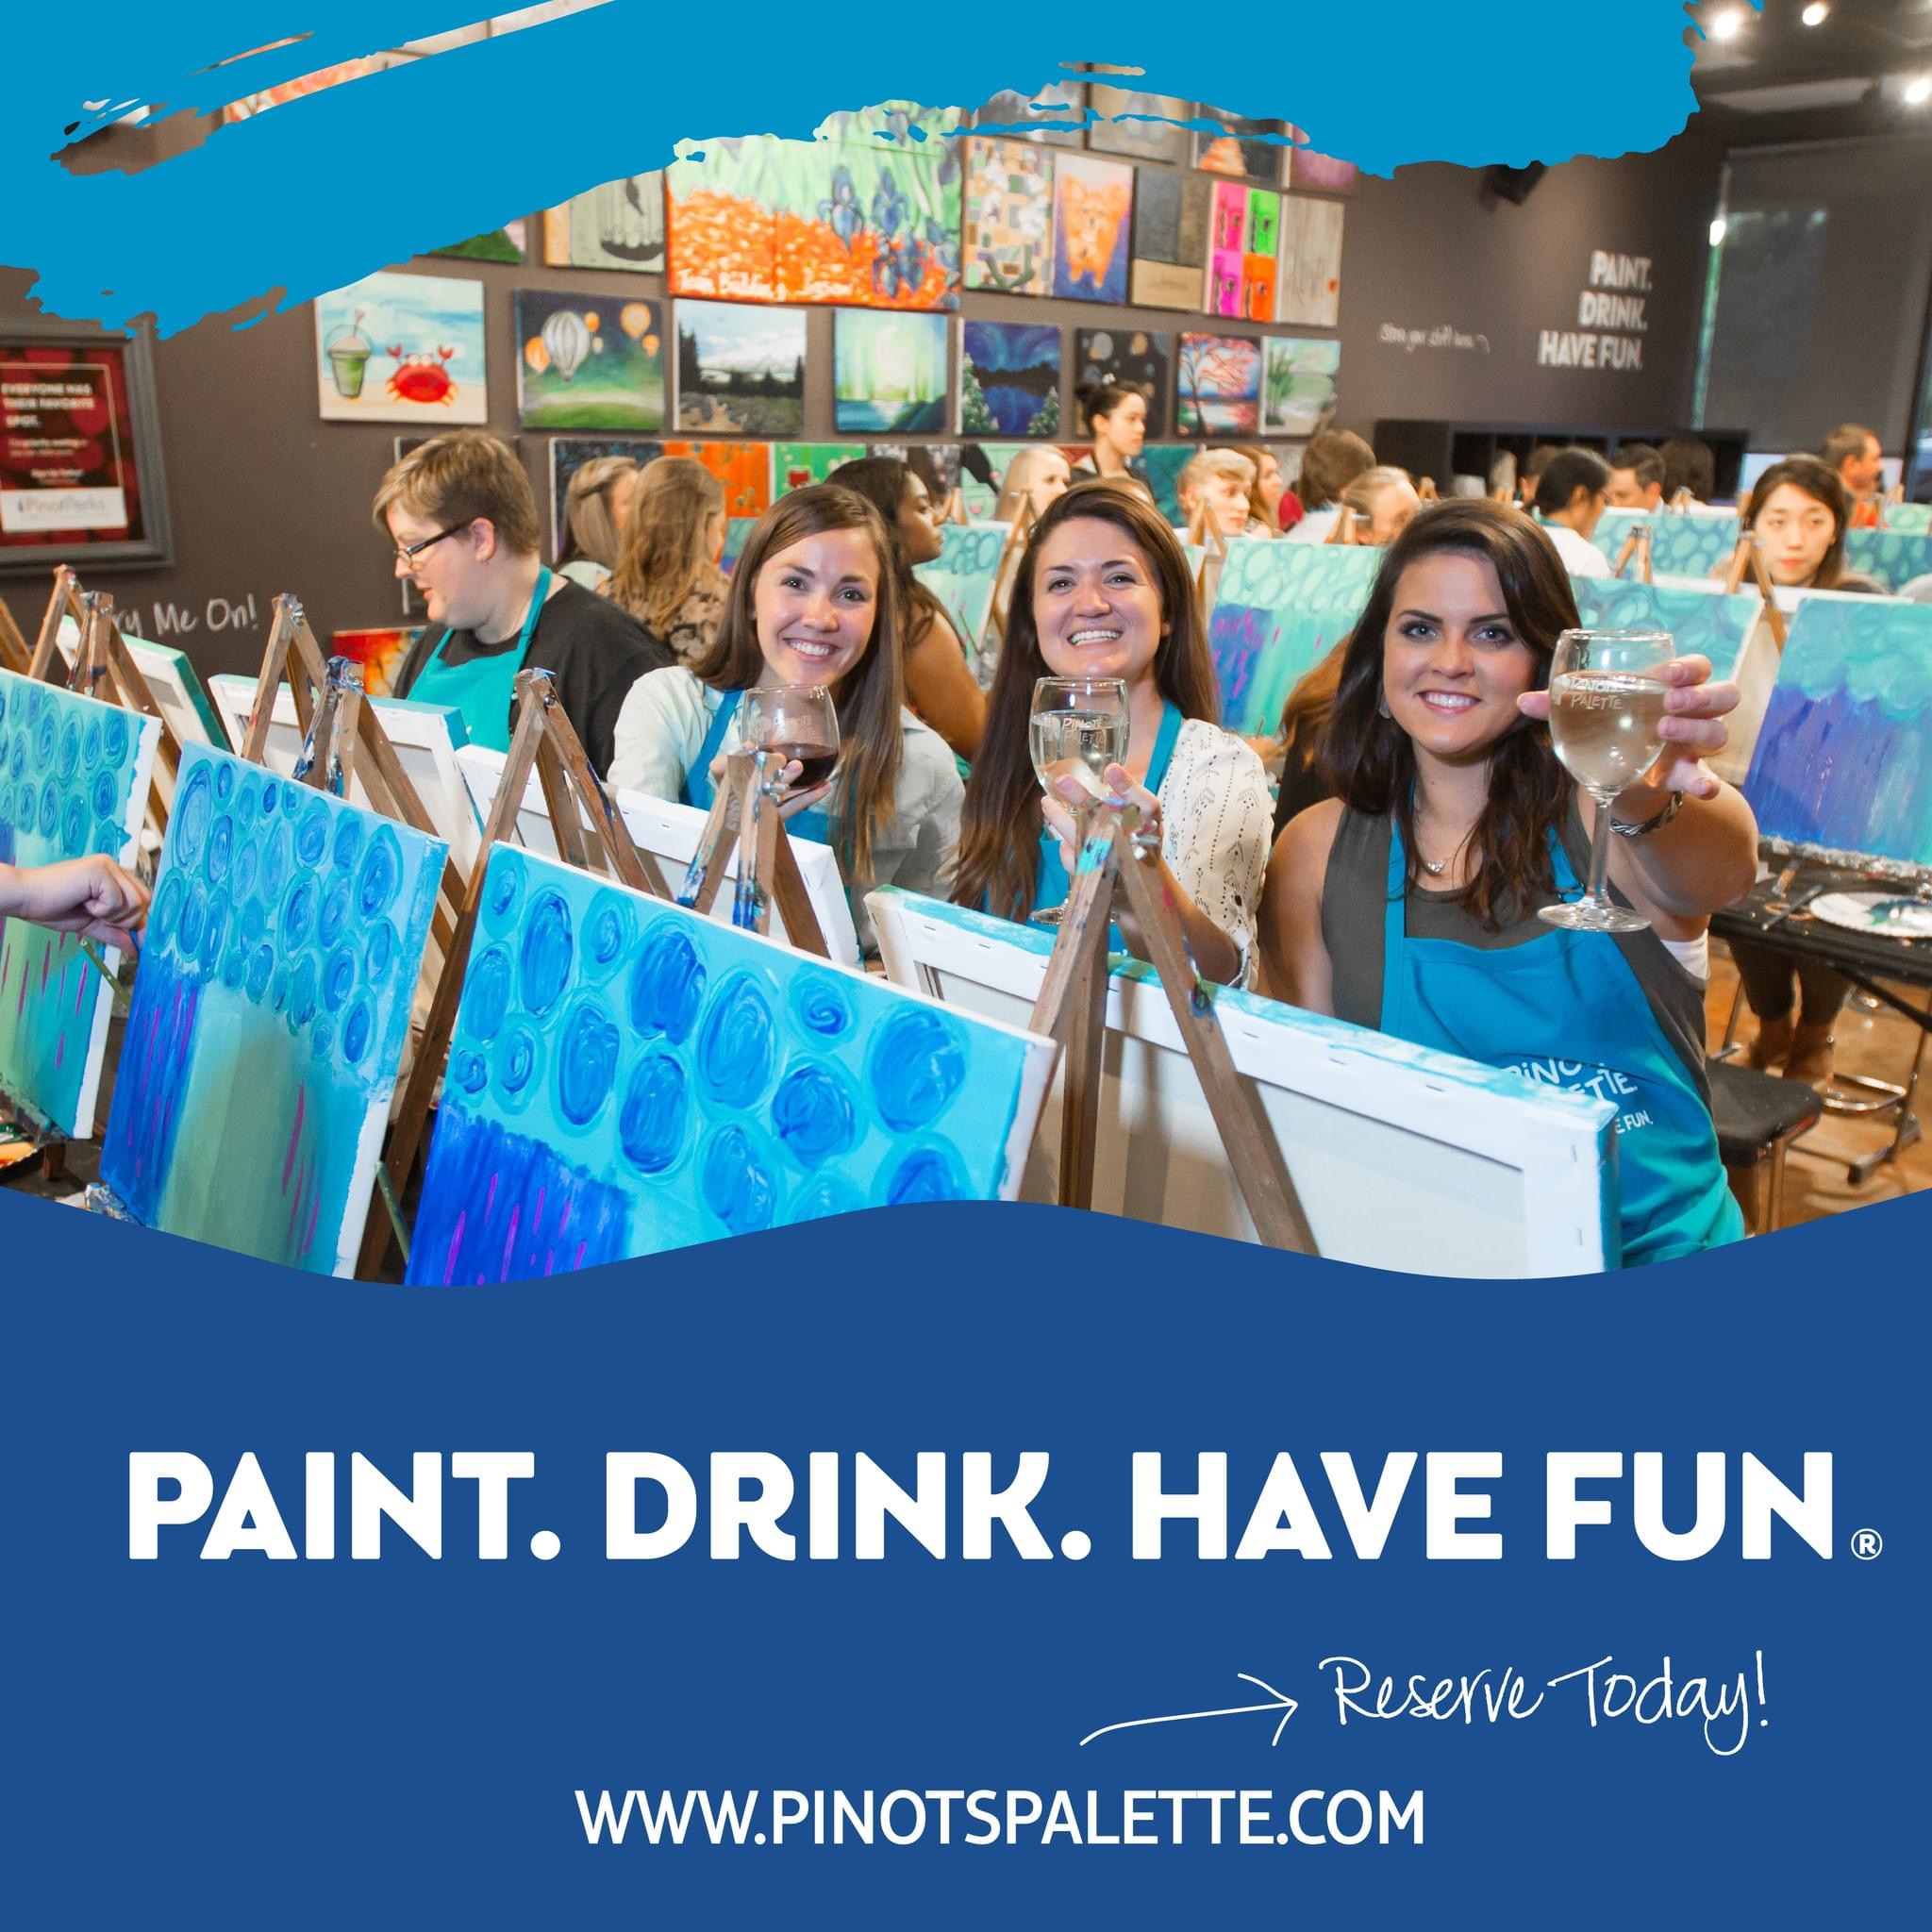 paint drink have fun image